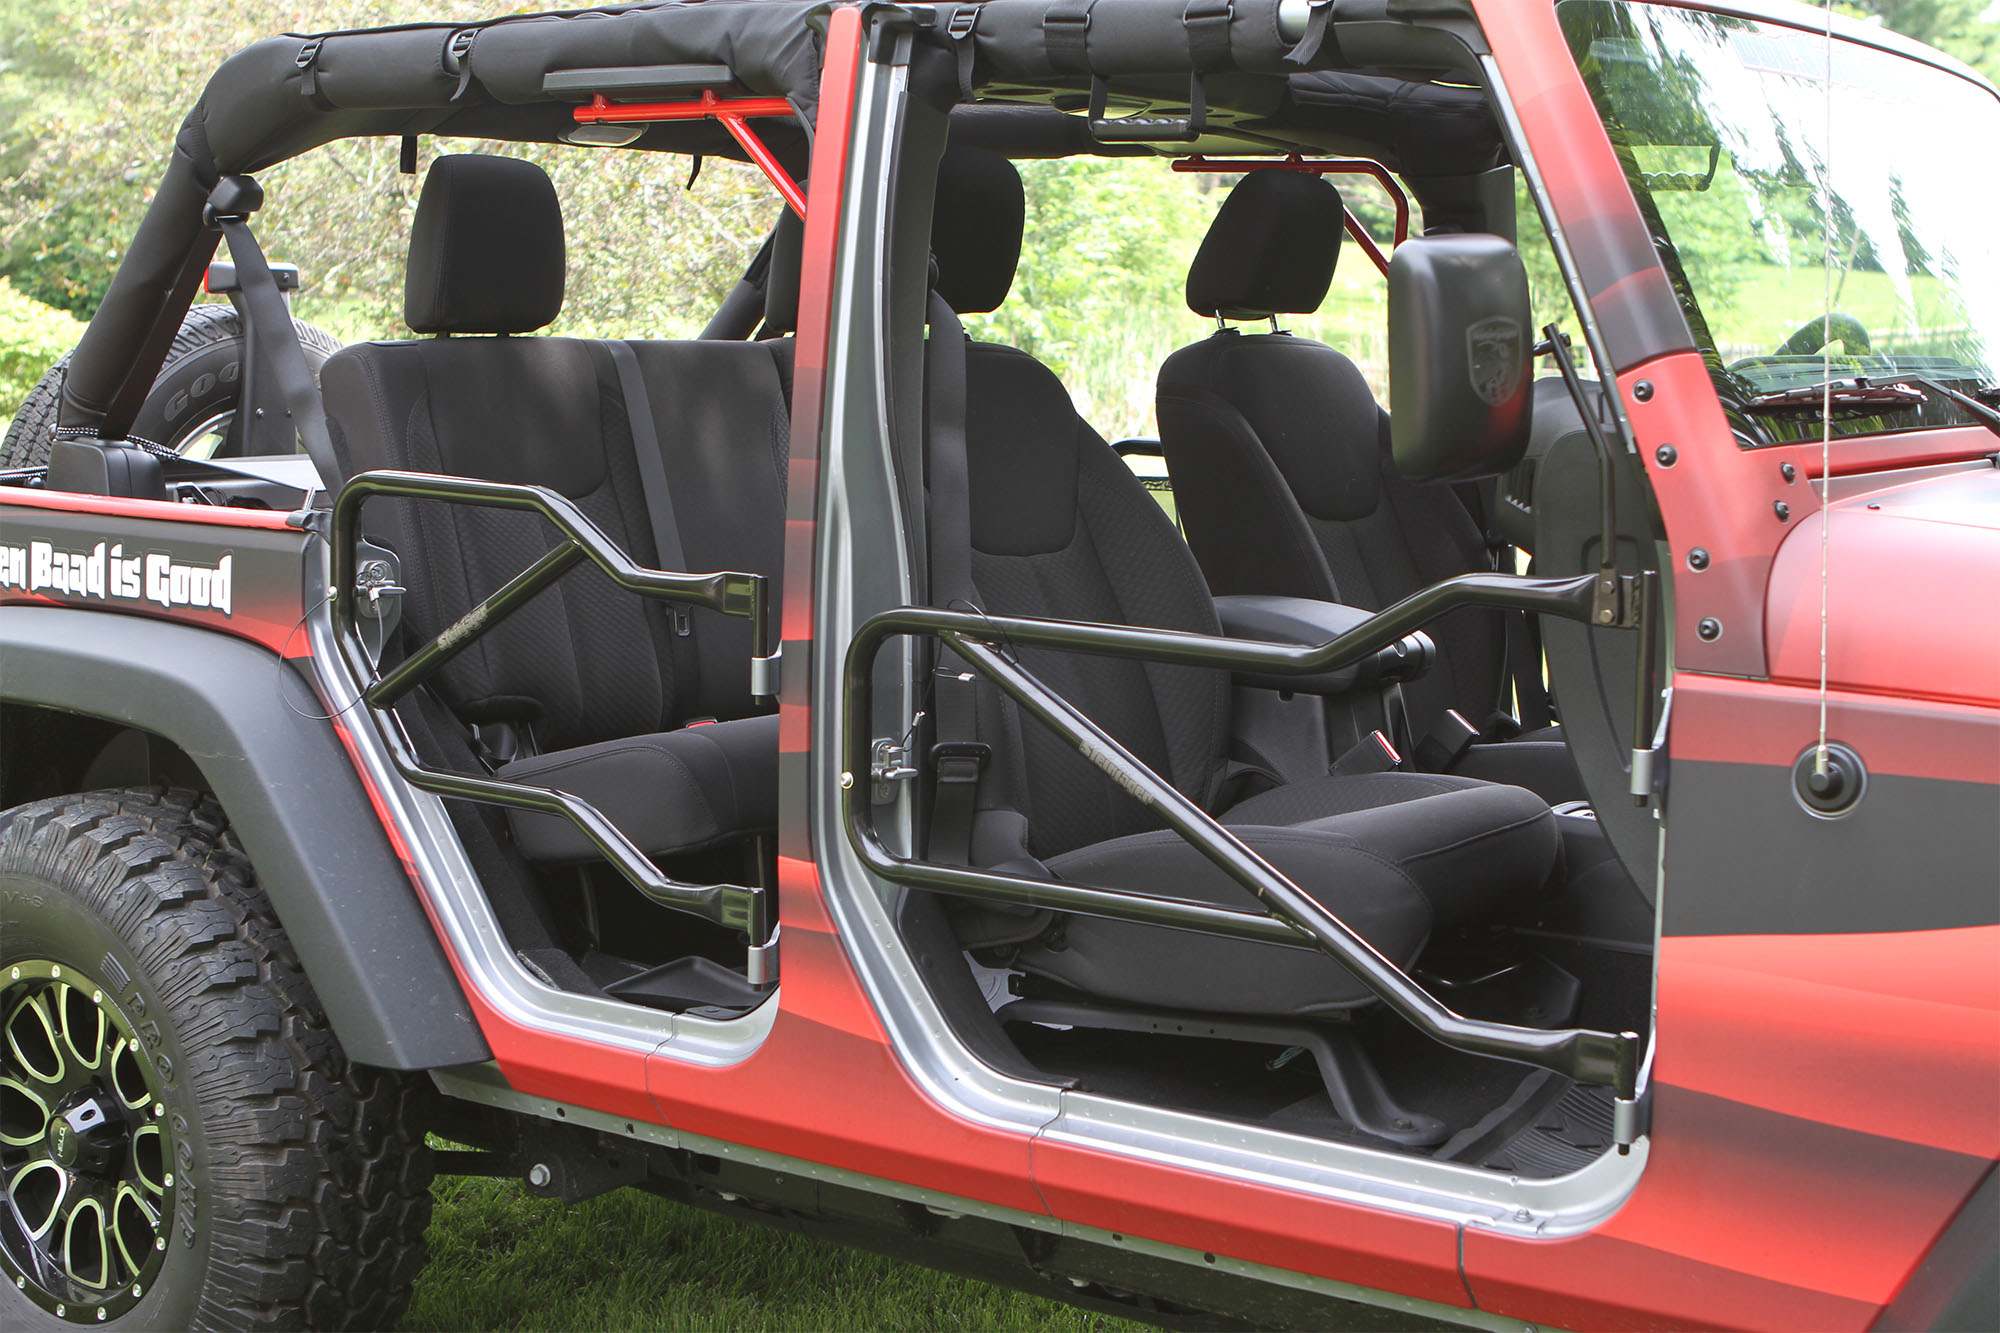 Jeep JK Wrangler Trail Door Kit Blue with White Covers